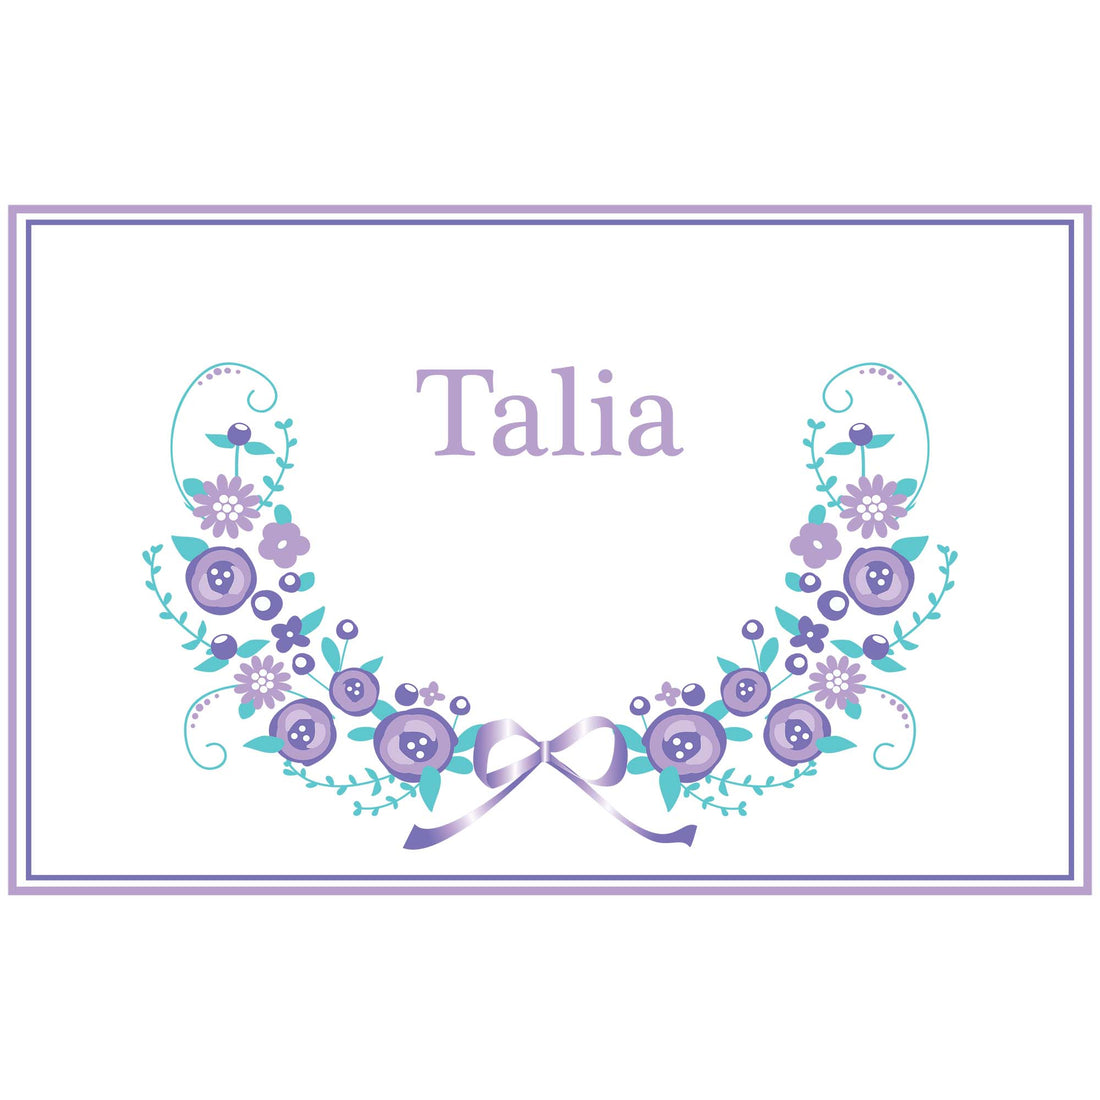 Personalized Placemat with Lavender Floral Garland design